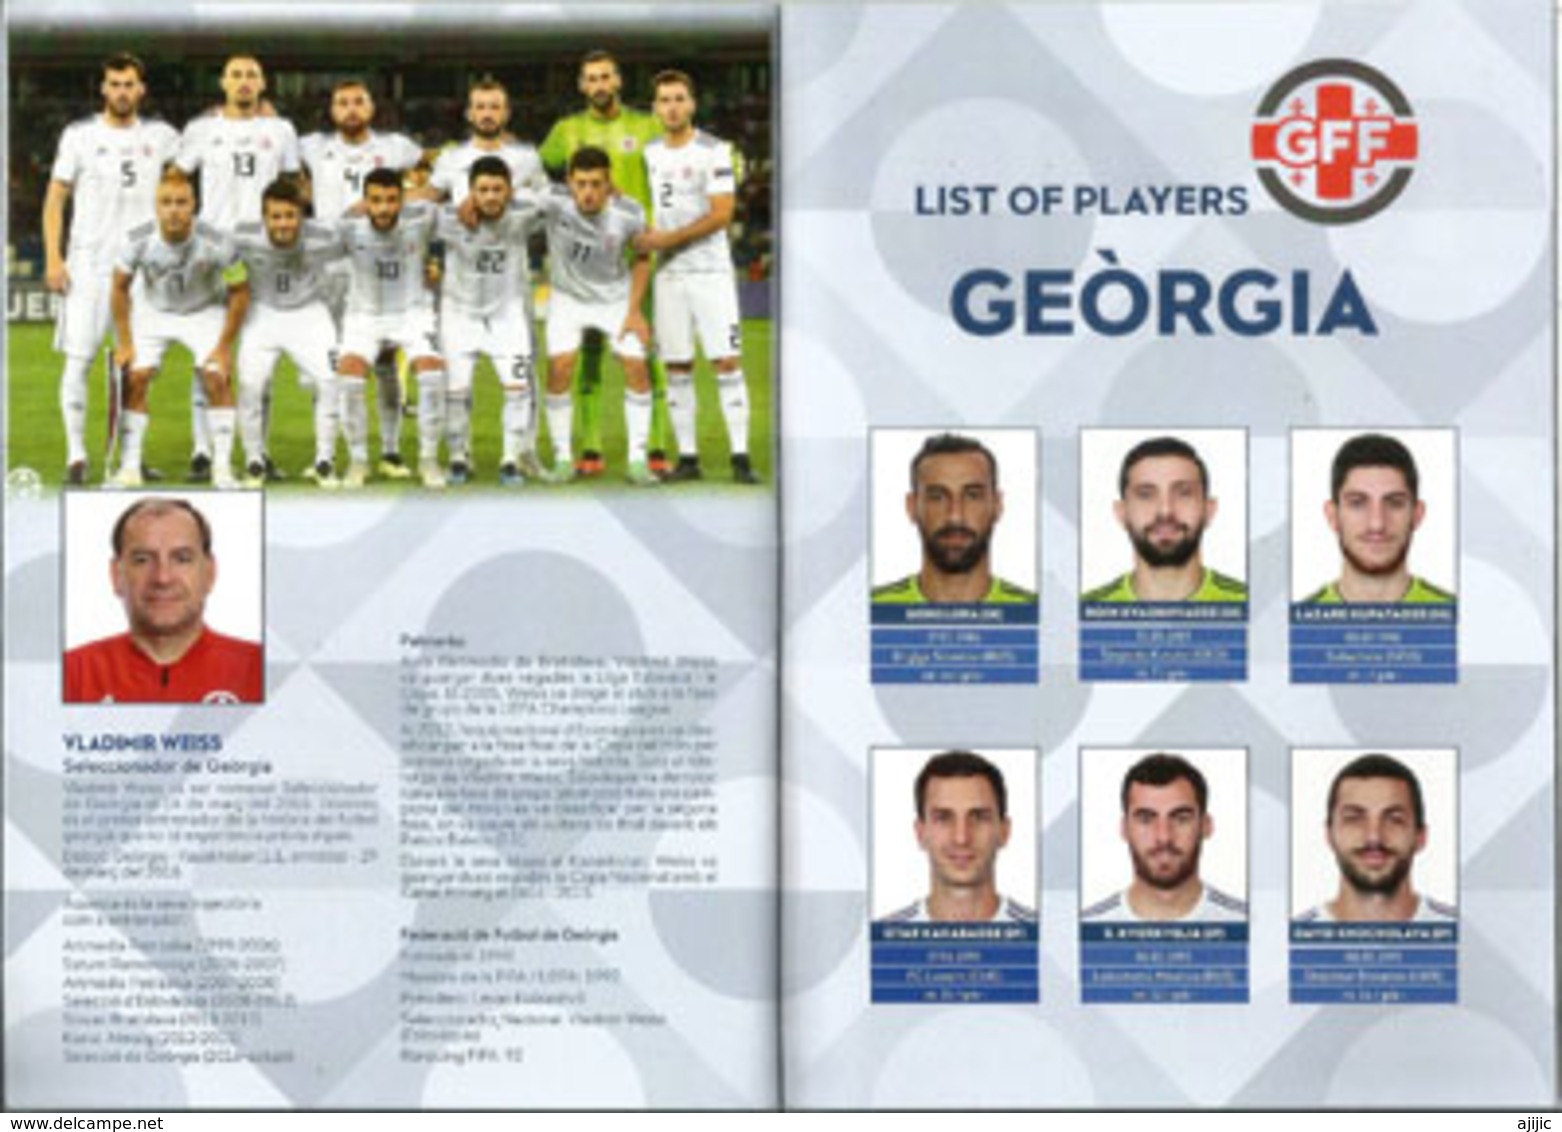 UEFA NATIONS LEAGUE 2018/19. ANDORRA-GEORGIA, BOOKLET 16 PAGES LUXE, Disponible Seuls Aux Tickets VIP.ONE AVAILABLE - Livres